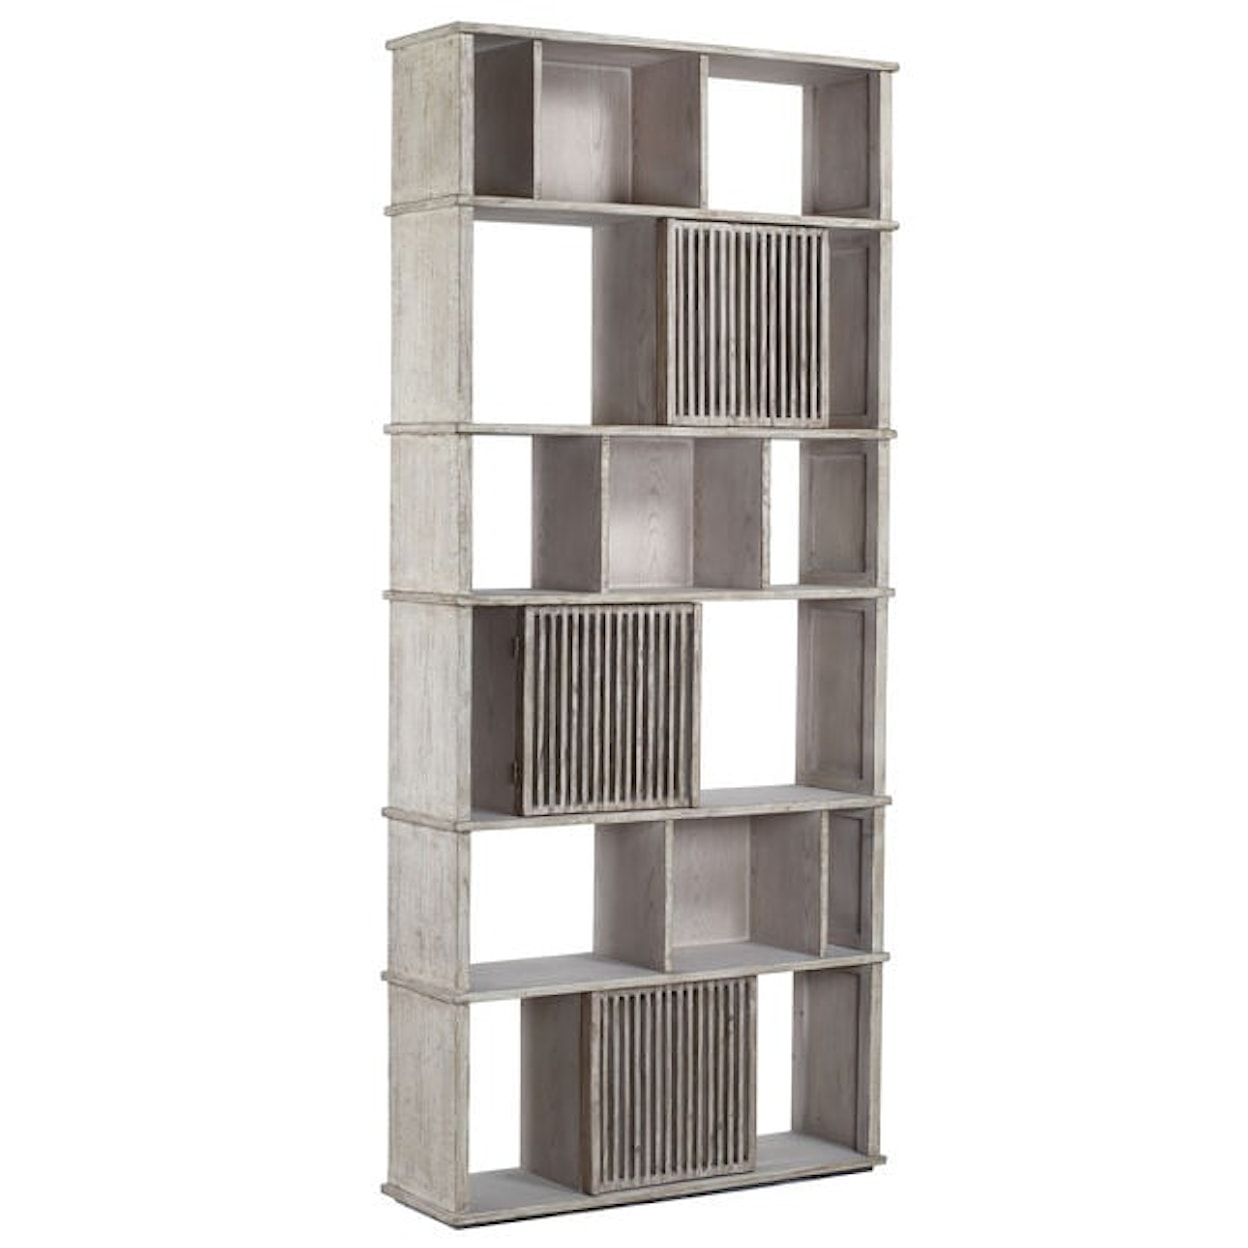 Dovetail Furniture Marco Marco Bookcase by Dovetail